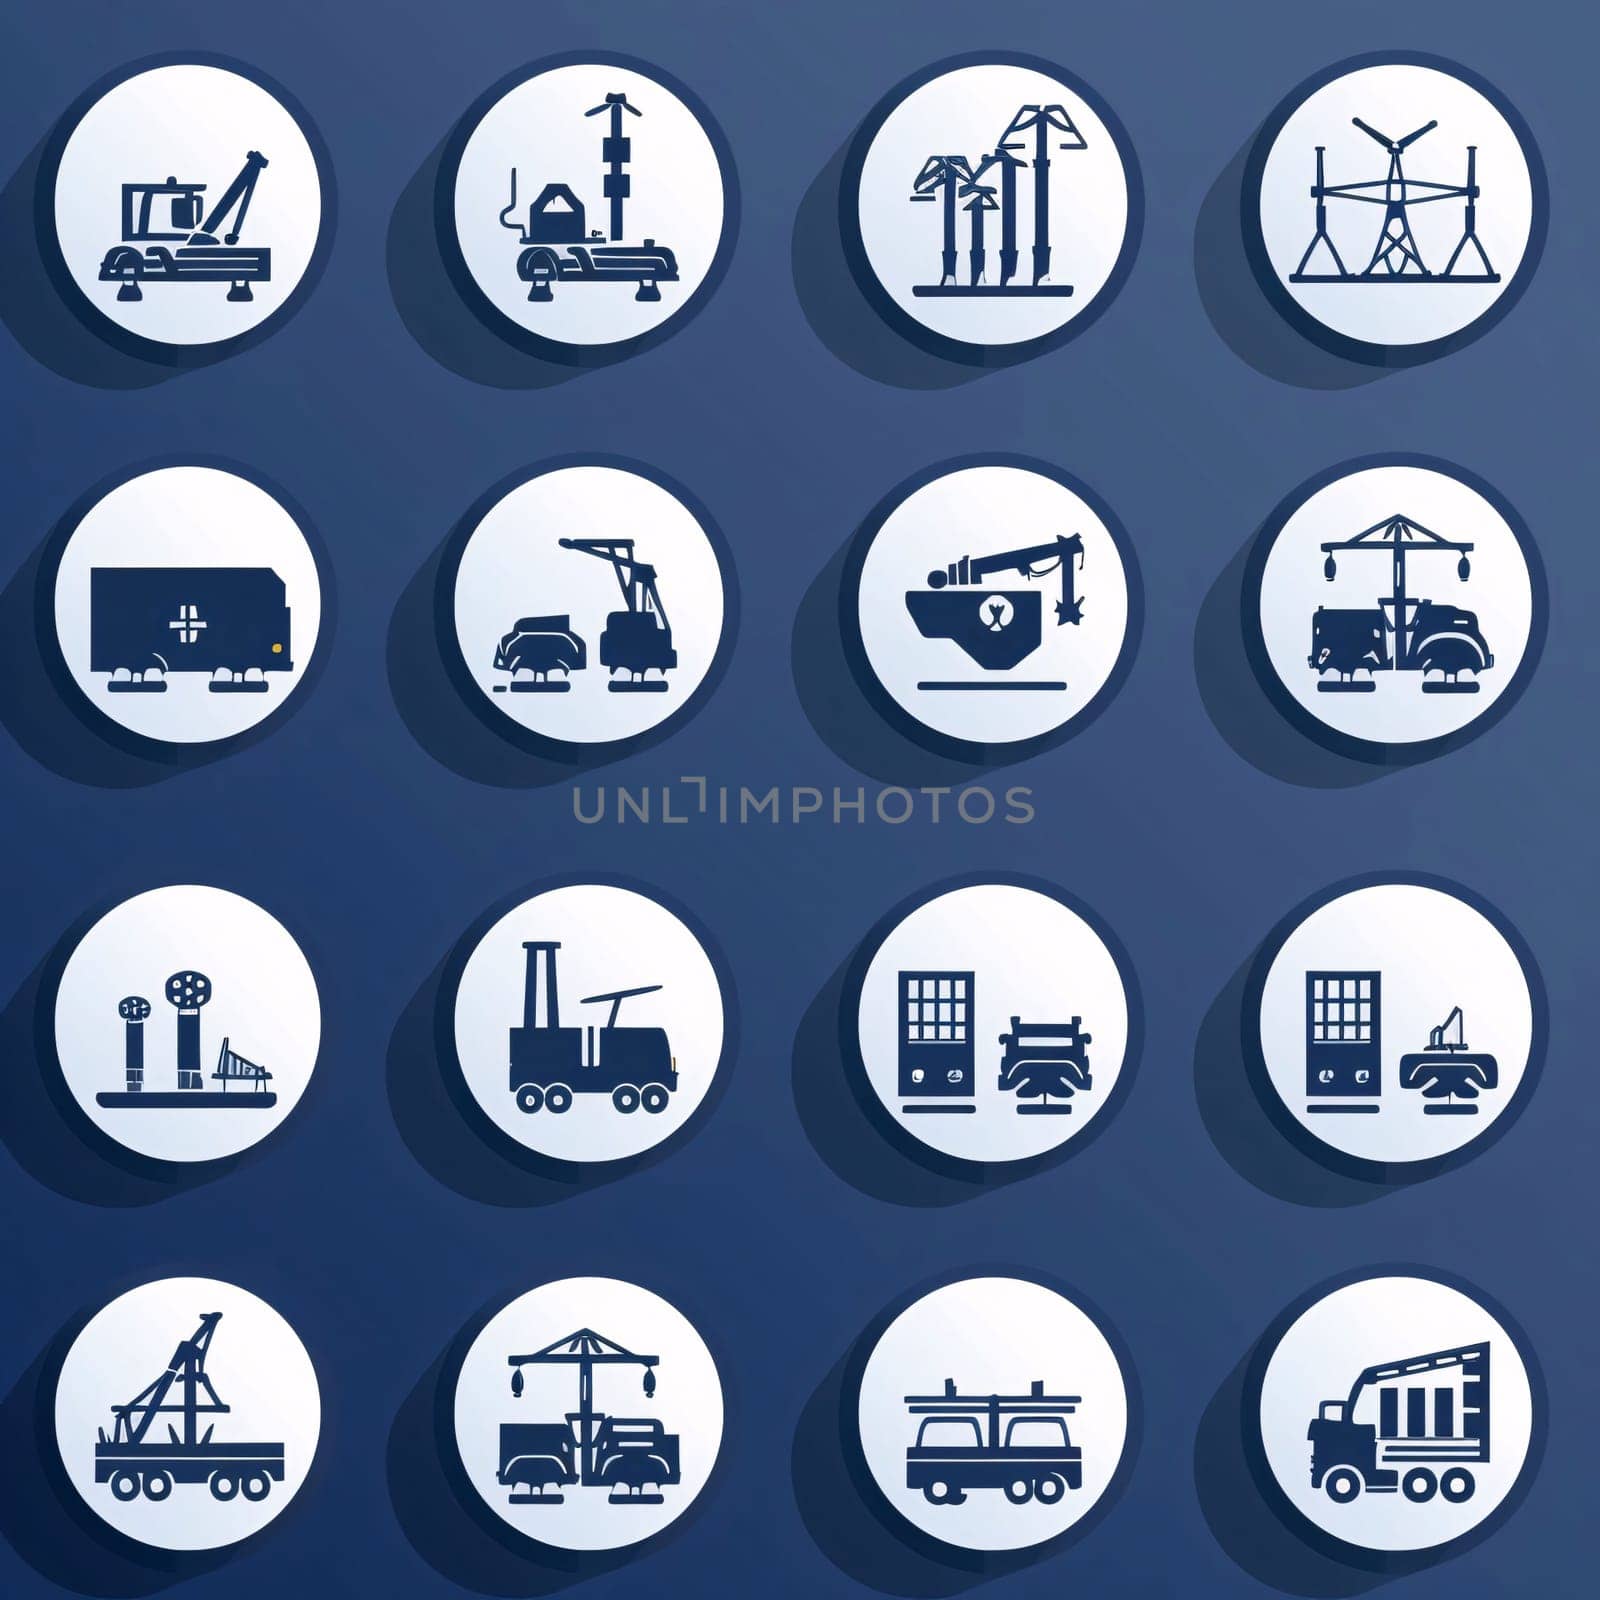 New icons collection: Industrial icons set for web sites and user interface. Vector illustration